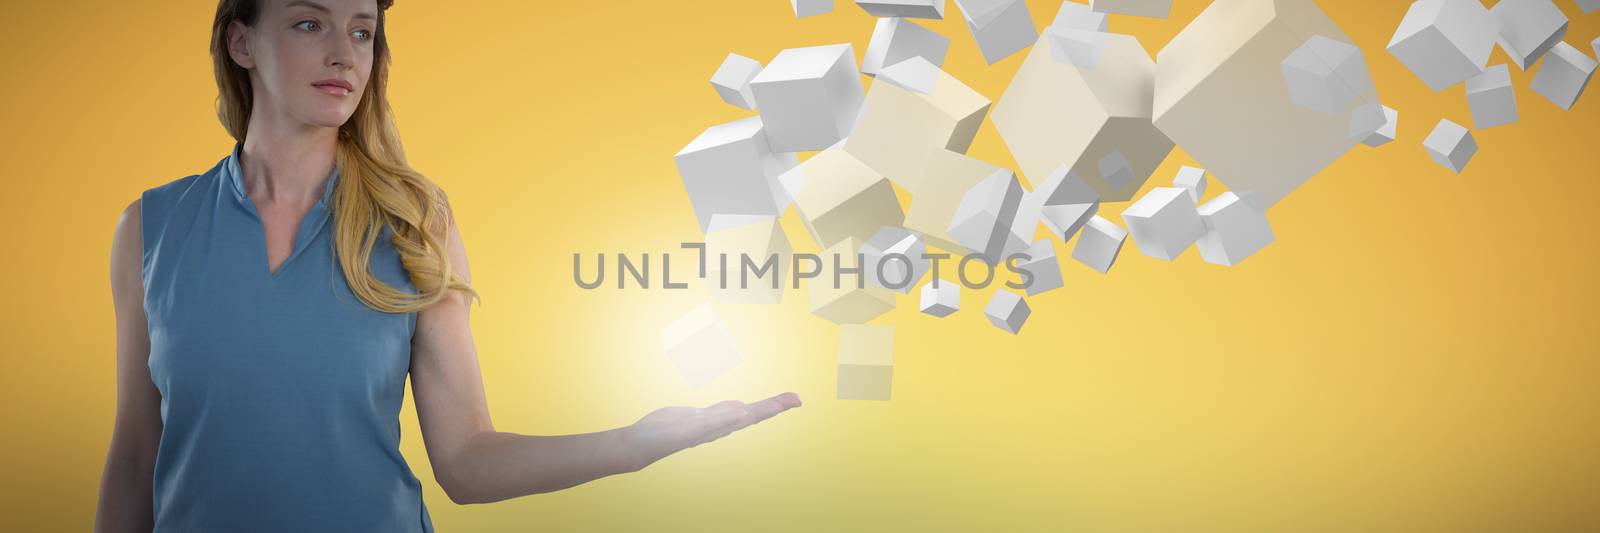 Composite image of businesswoman presenting object by Wavebreakmedia